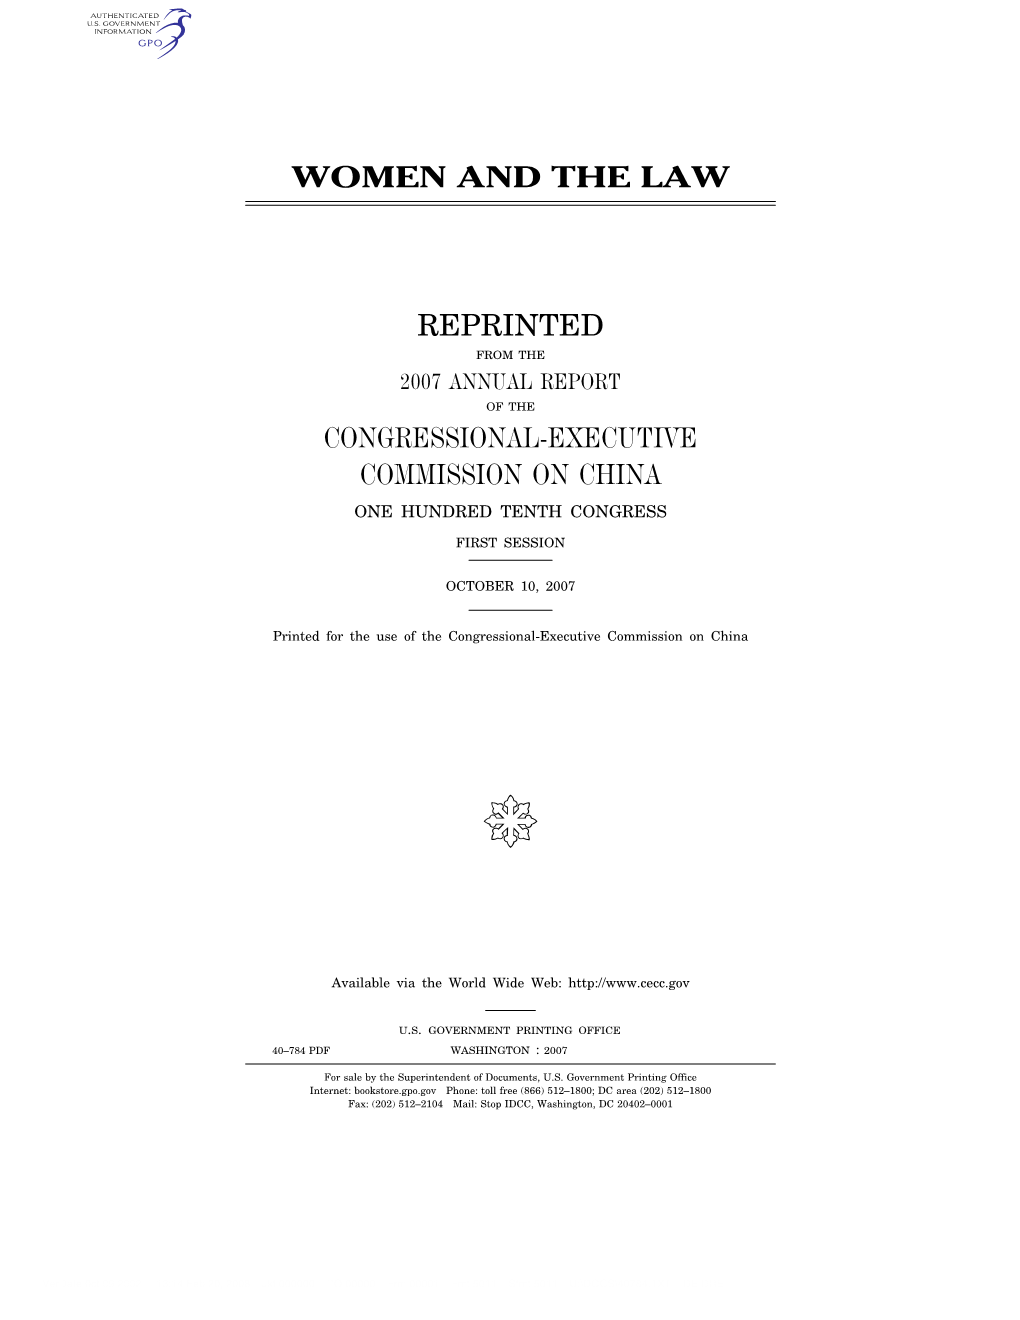 Women and the Law Reprinted Congressional